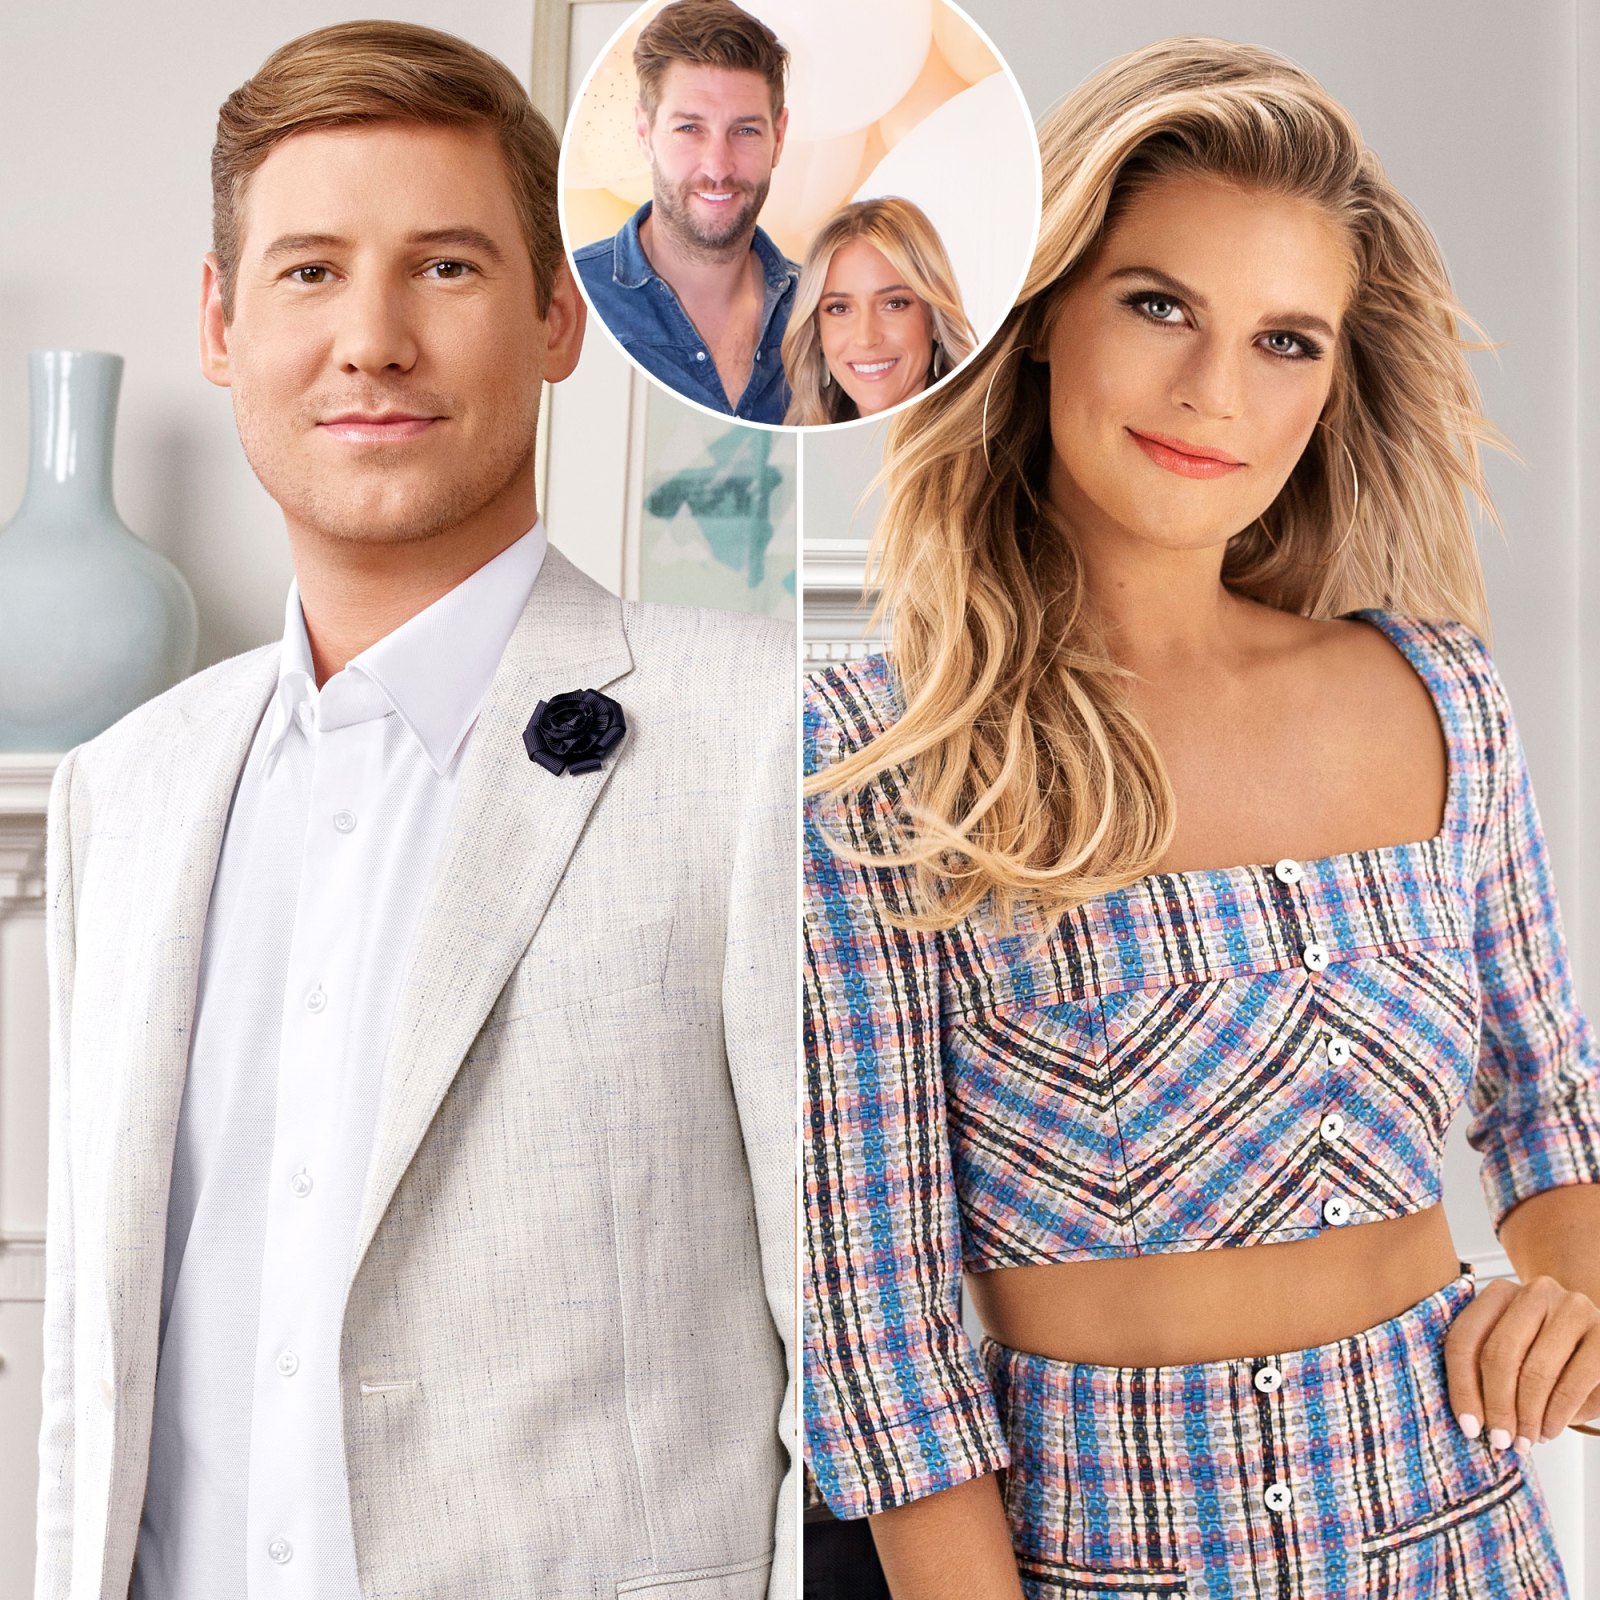 0 Southern Charm’s Austen Kroll and Madison LeCroy’s Messy Split